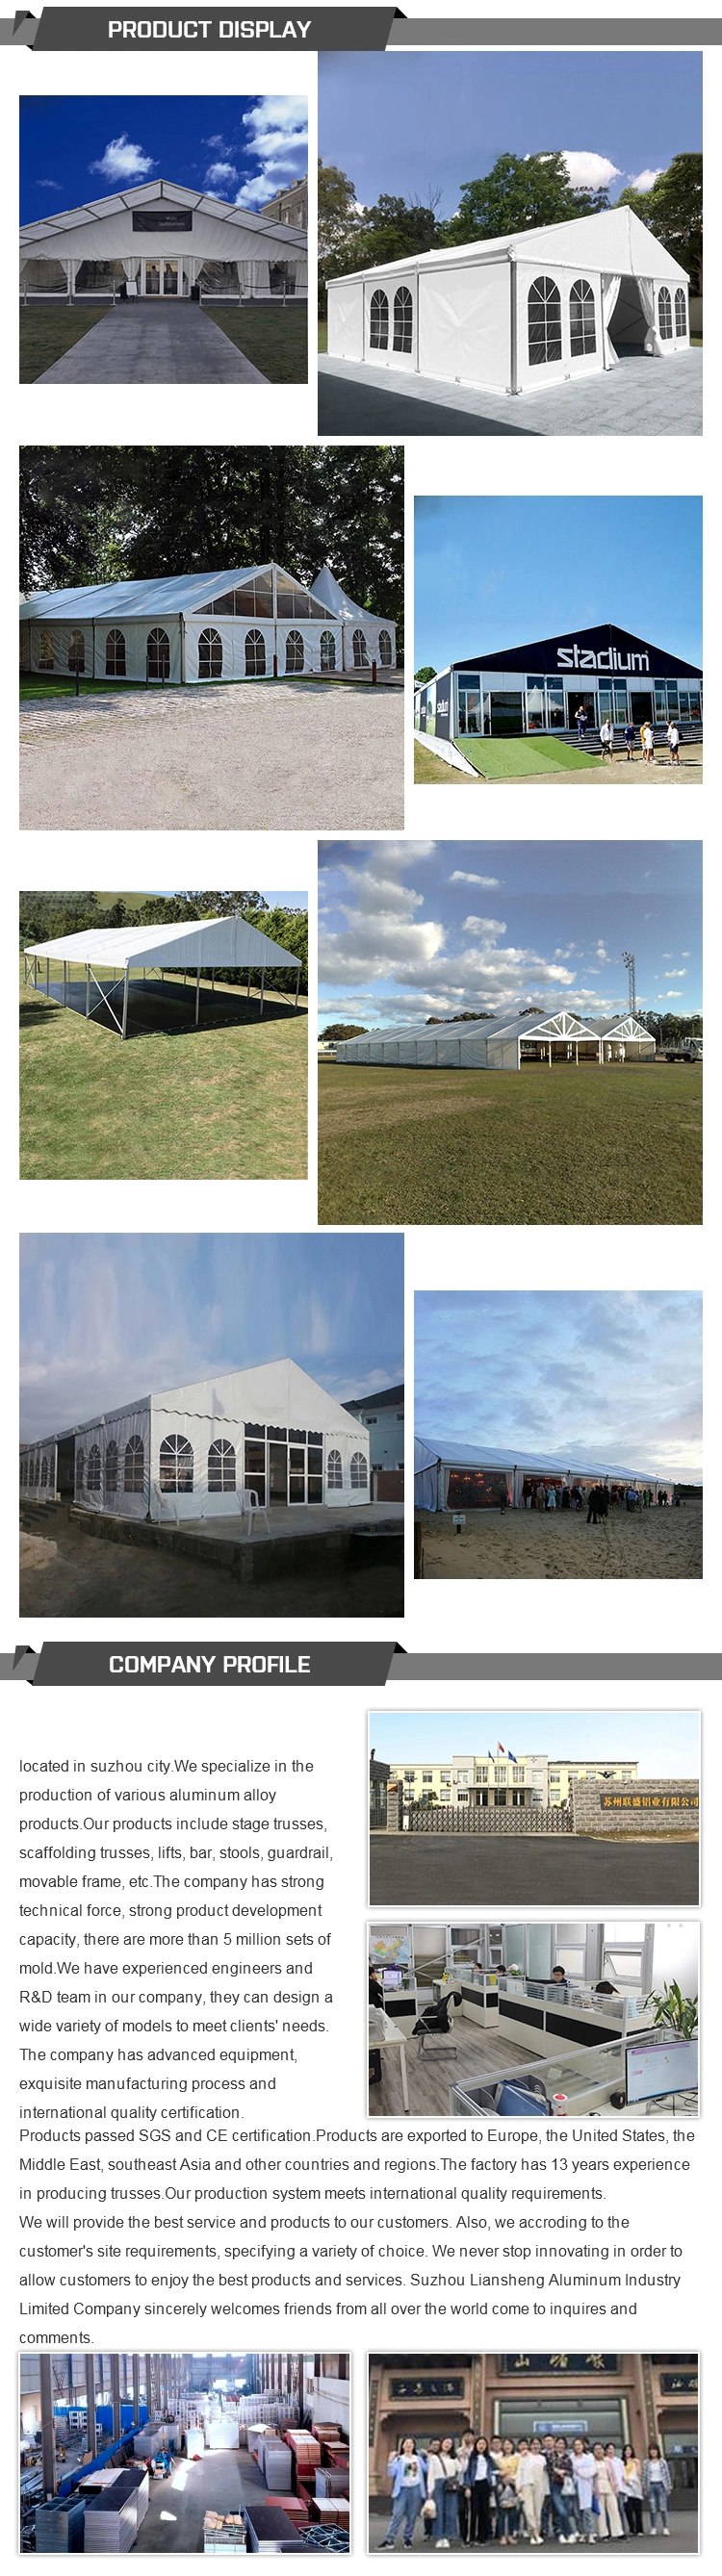 100 Man Tent Herringbone Event Awning Tent with Stretch Aluminum Structure